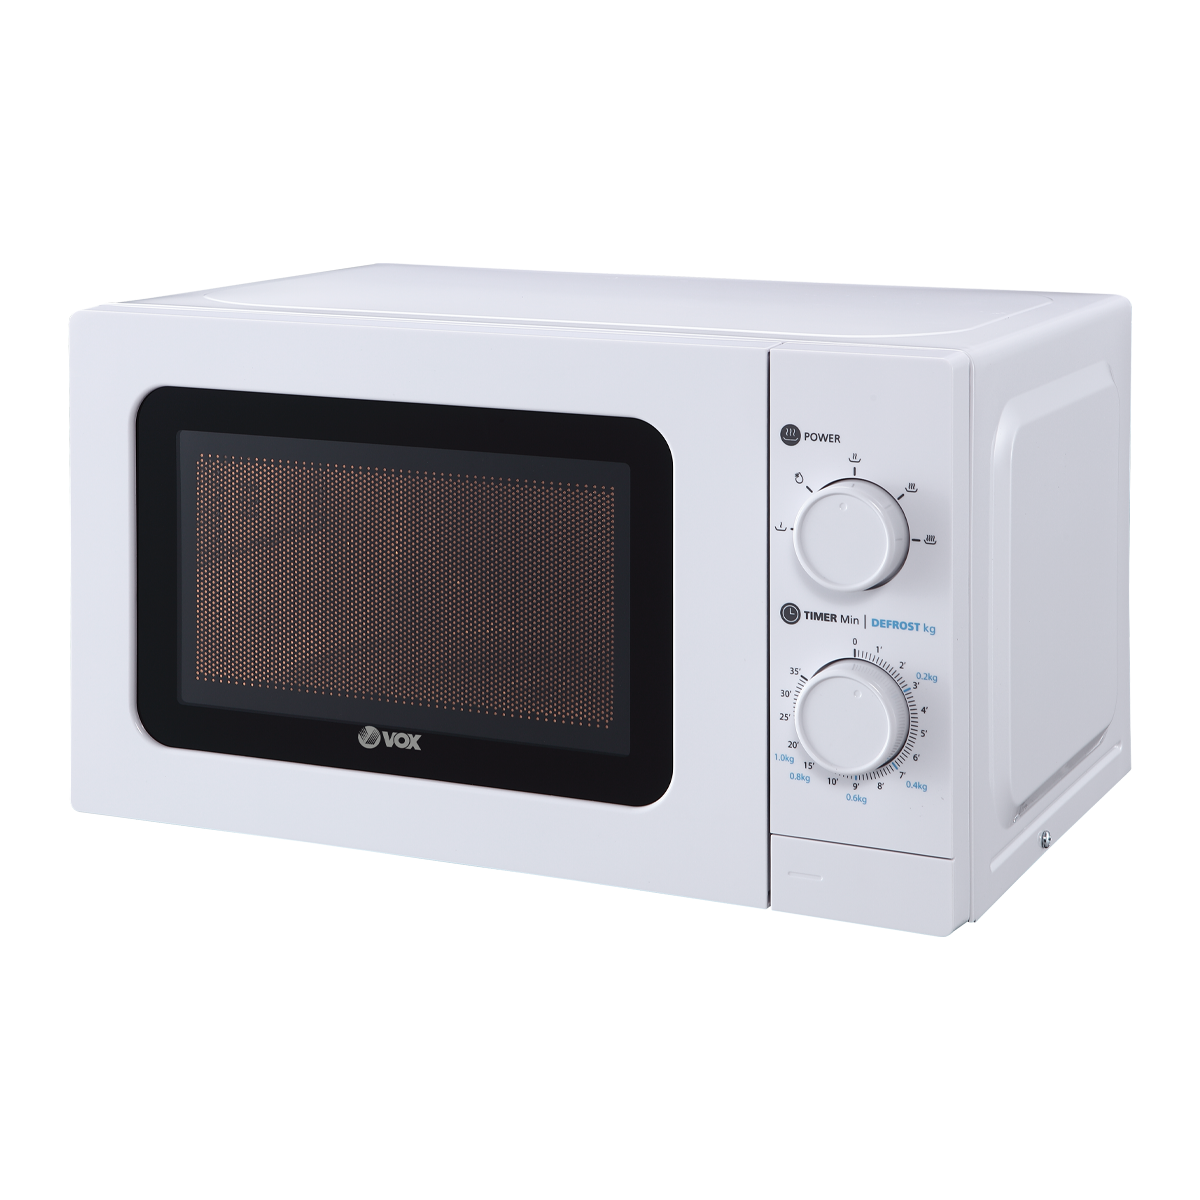 Built-in microwave oven MWH-M24 